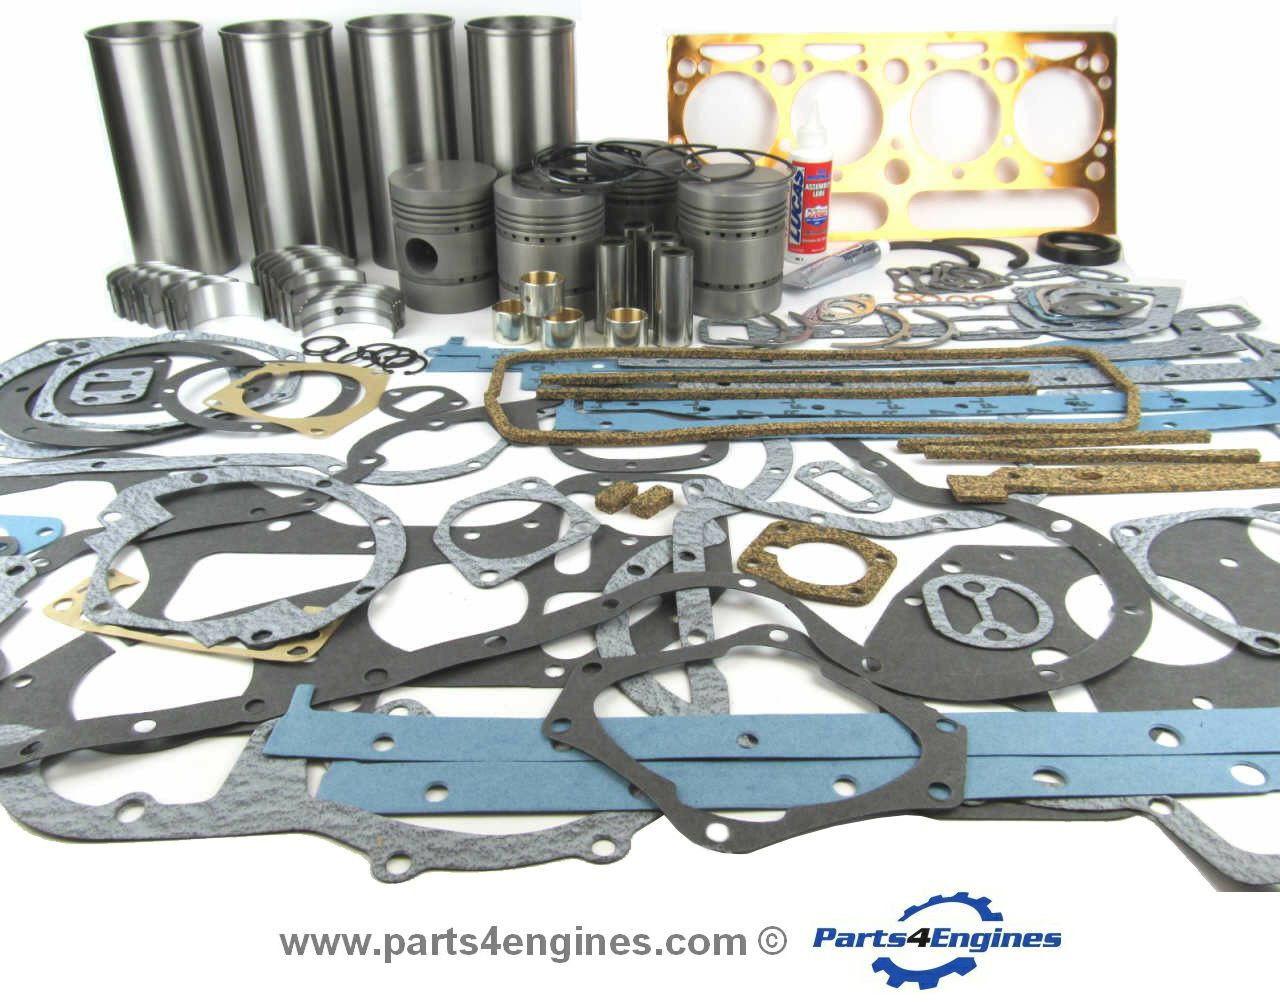 Perkins 4.203 engine overhaul kit from parts4engines.com